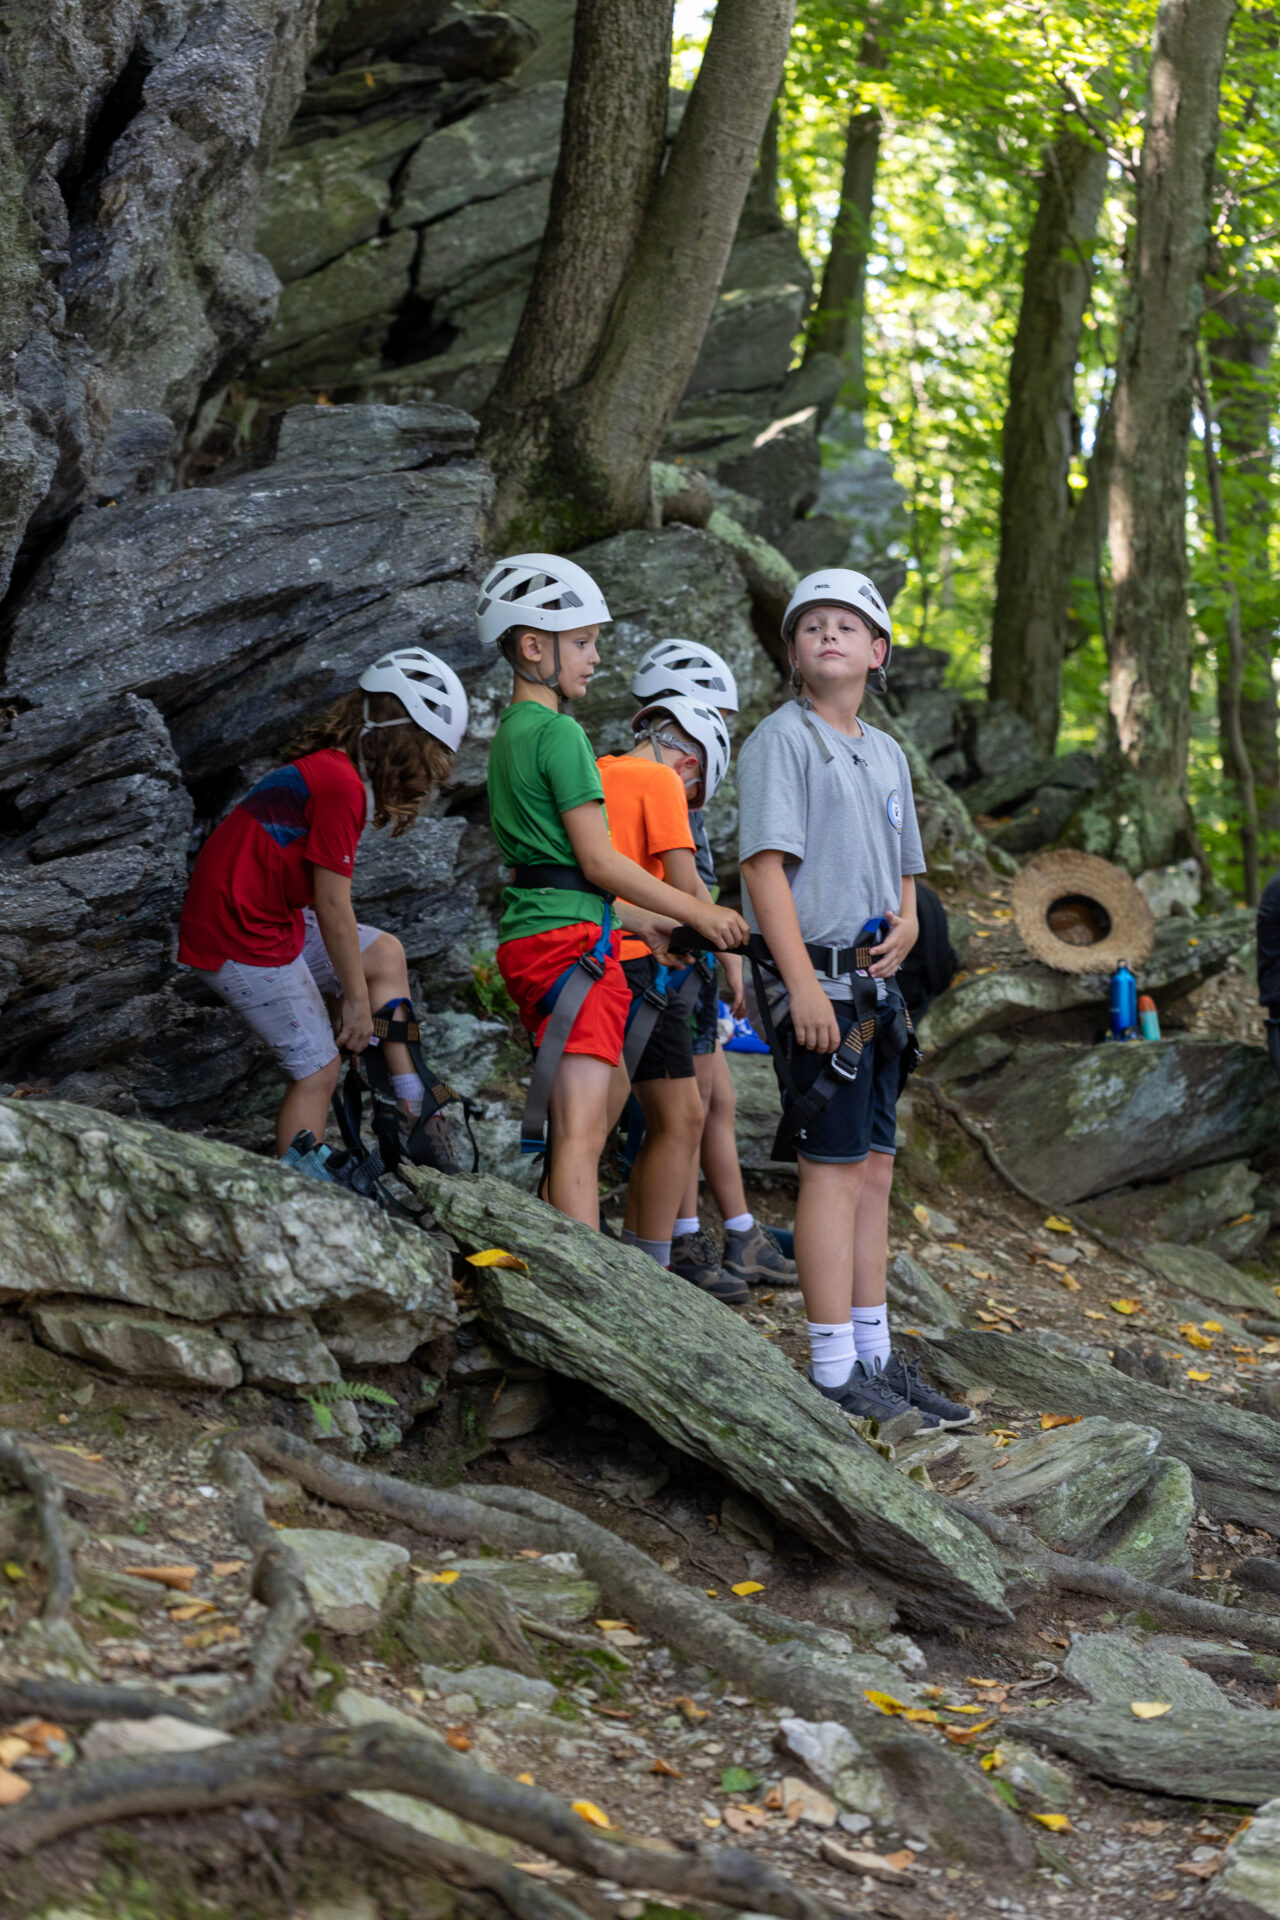 A group of kids exploring BearTrax on a rock.